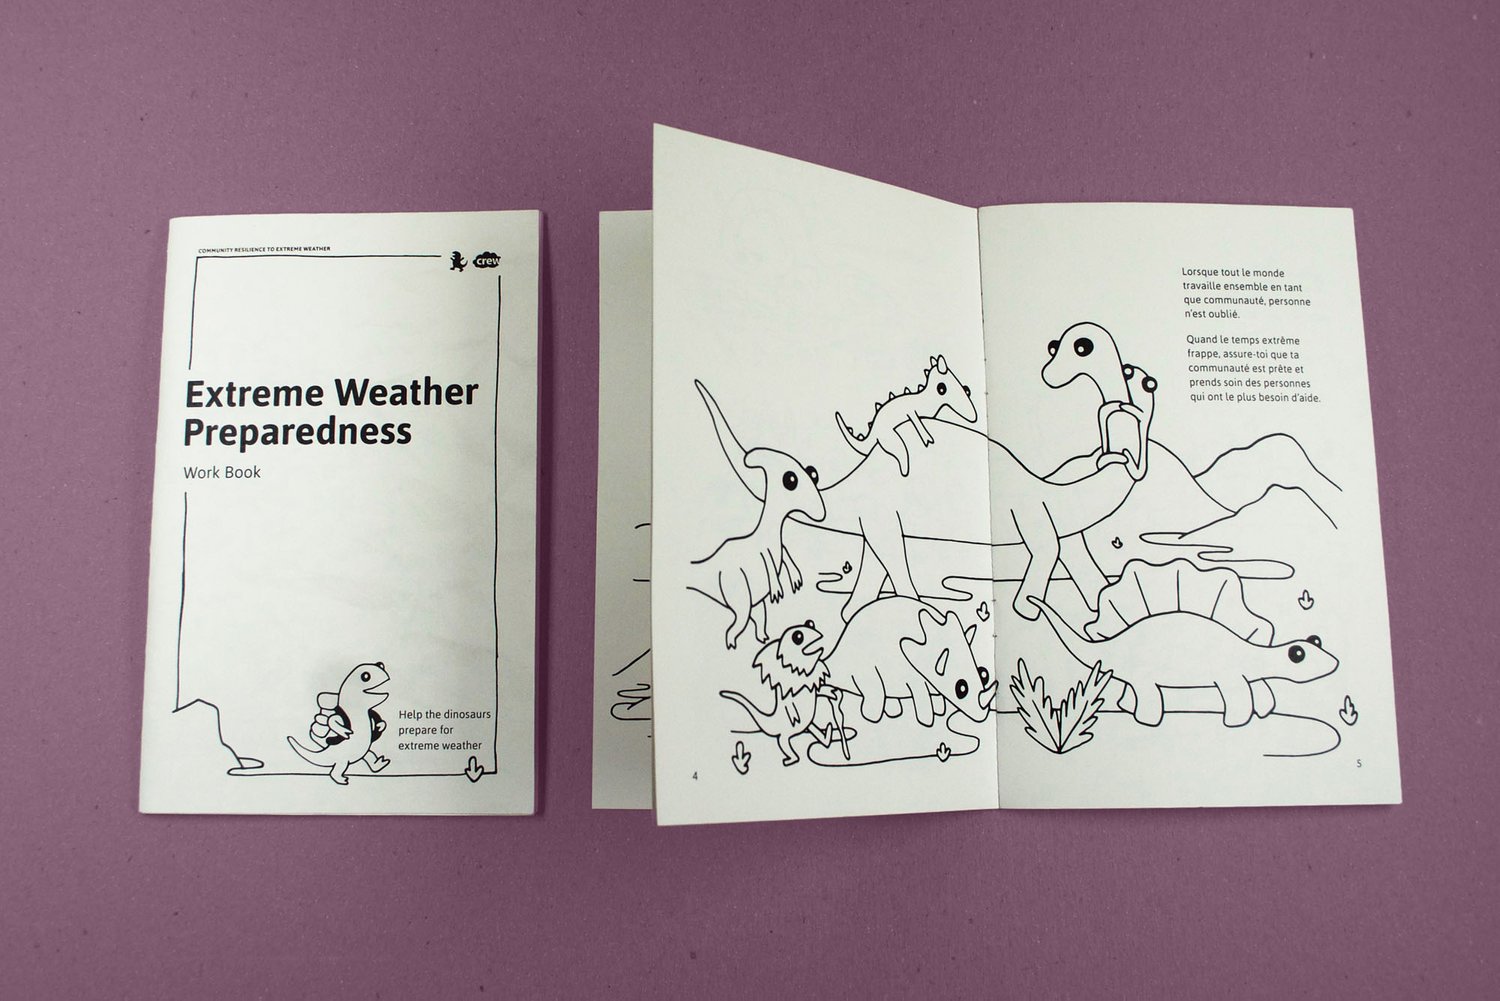 Front cover and spread of colouring booklet with dinosaurs migrating together